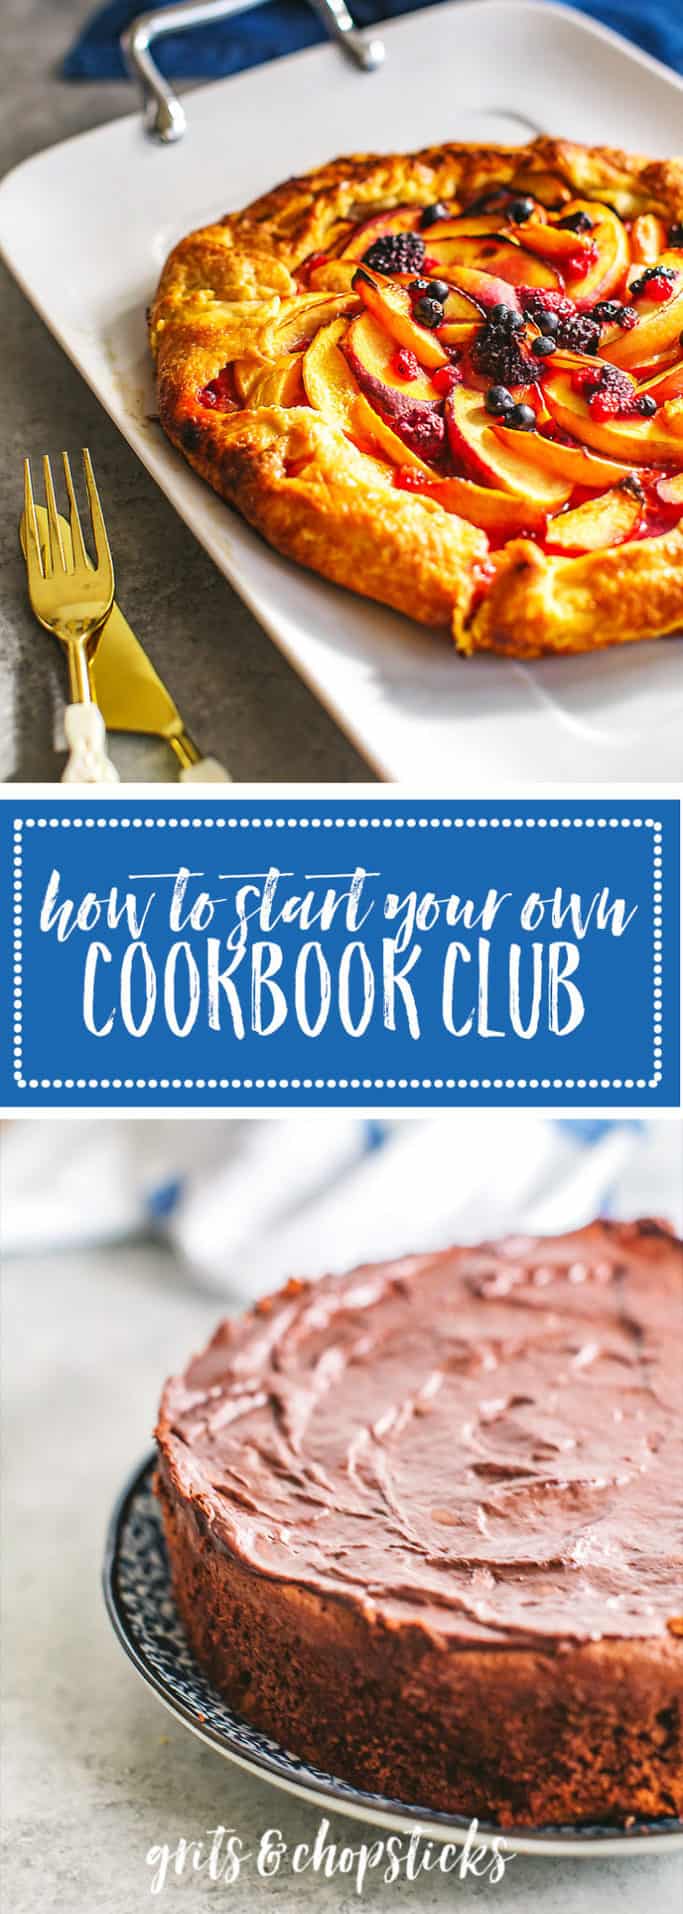 How to start your own cookbook club, where members cook recipes from the same cookbook at each meeting. It's the best kind of potluck!